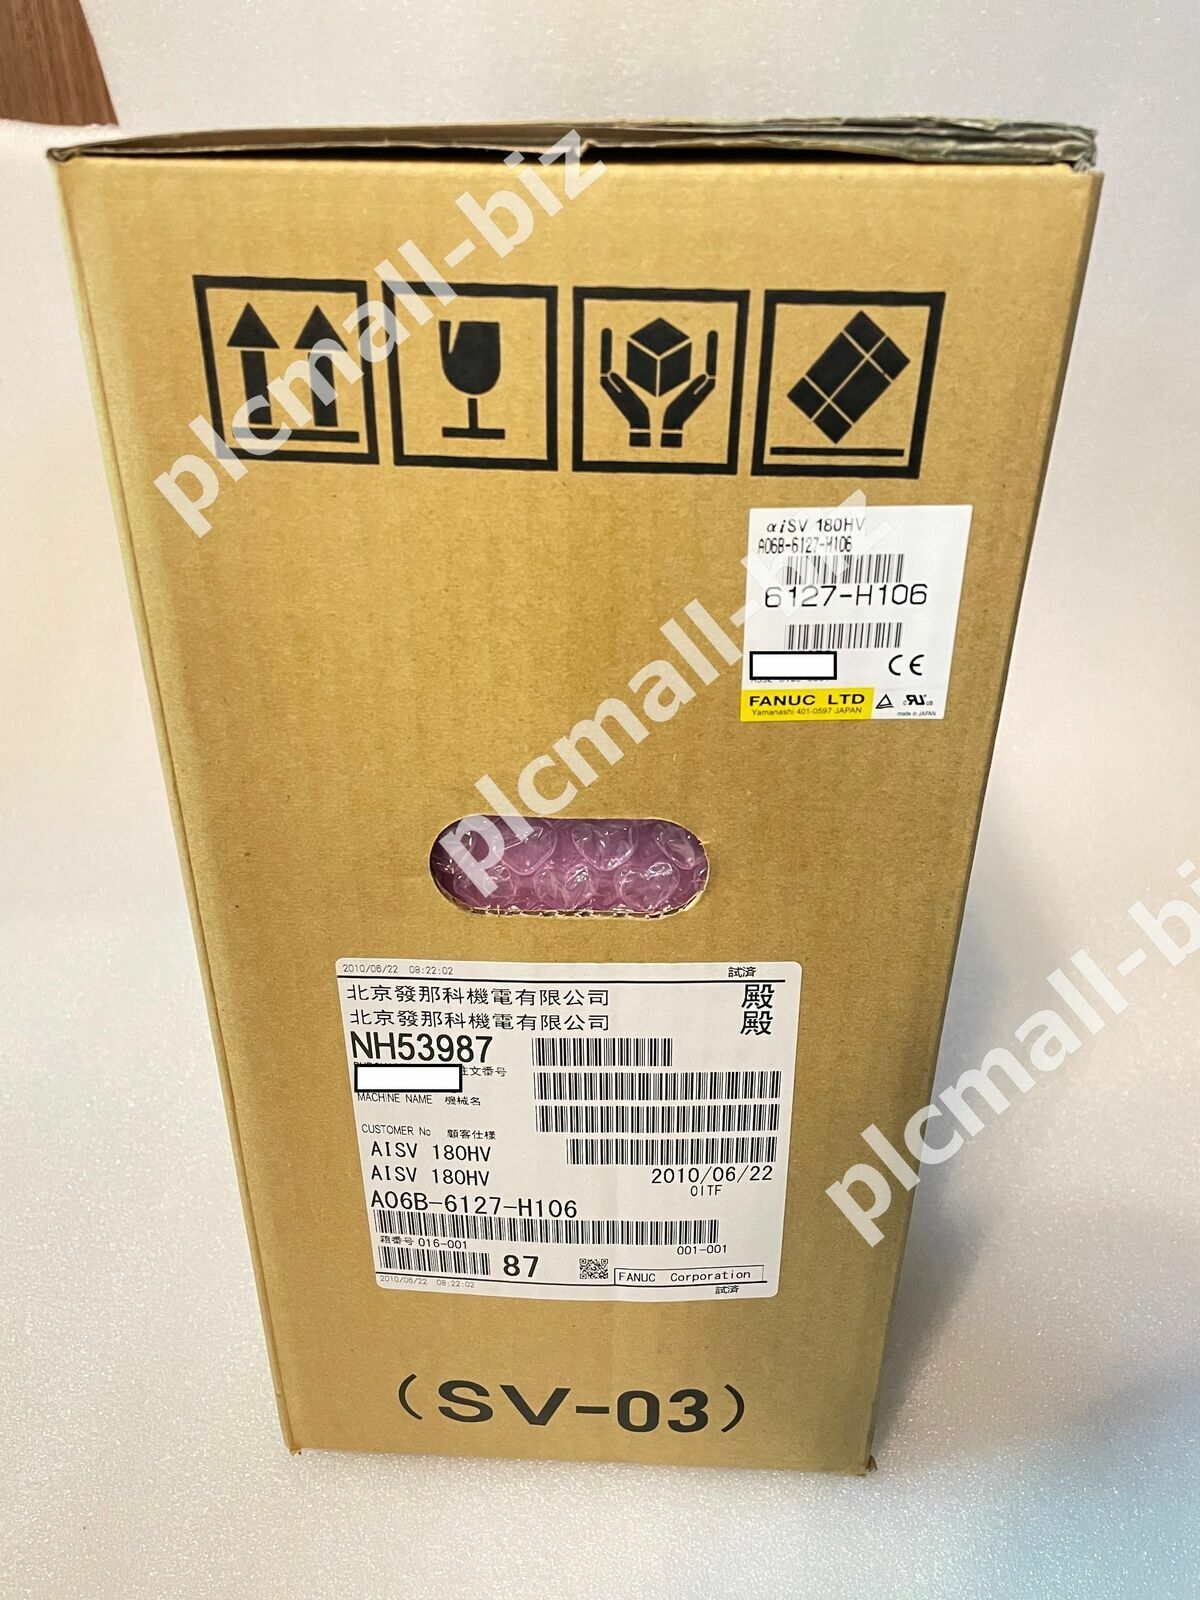 A06B-6127-H106 Fanuc server Driver Brand new By SF Or DHL express*Y